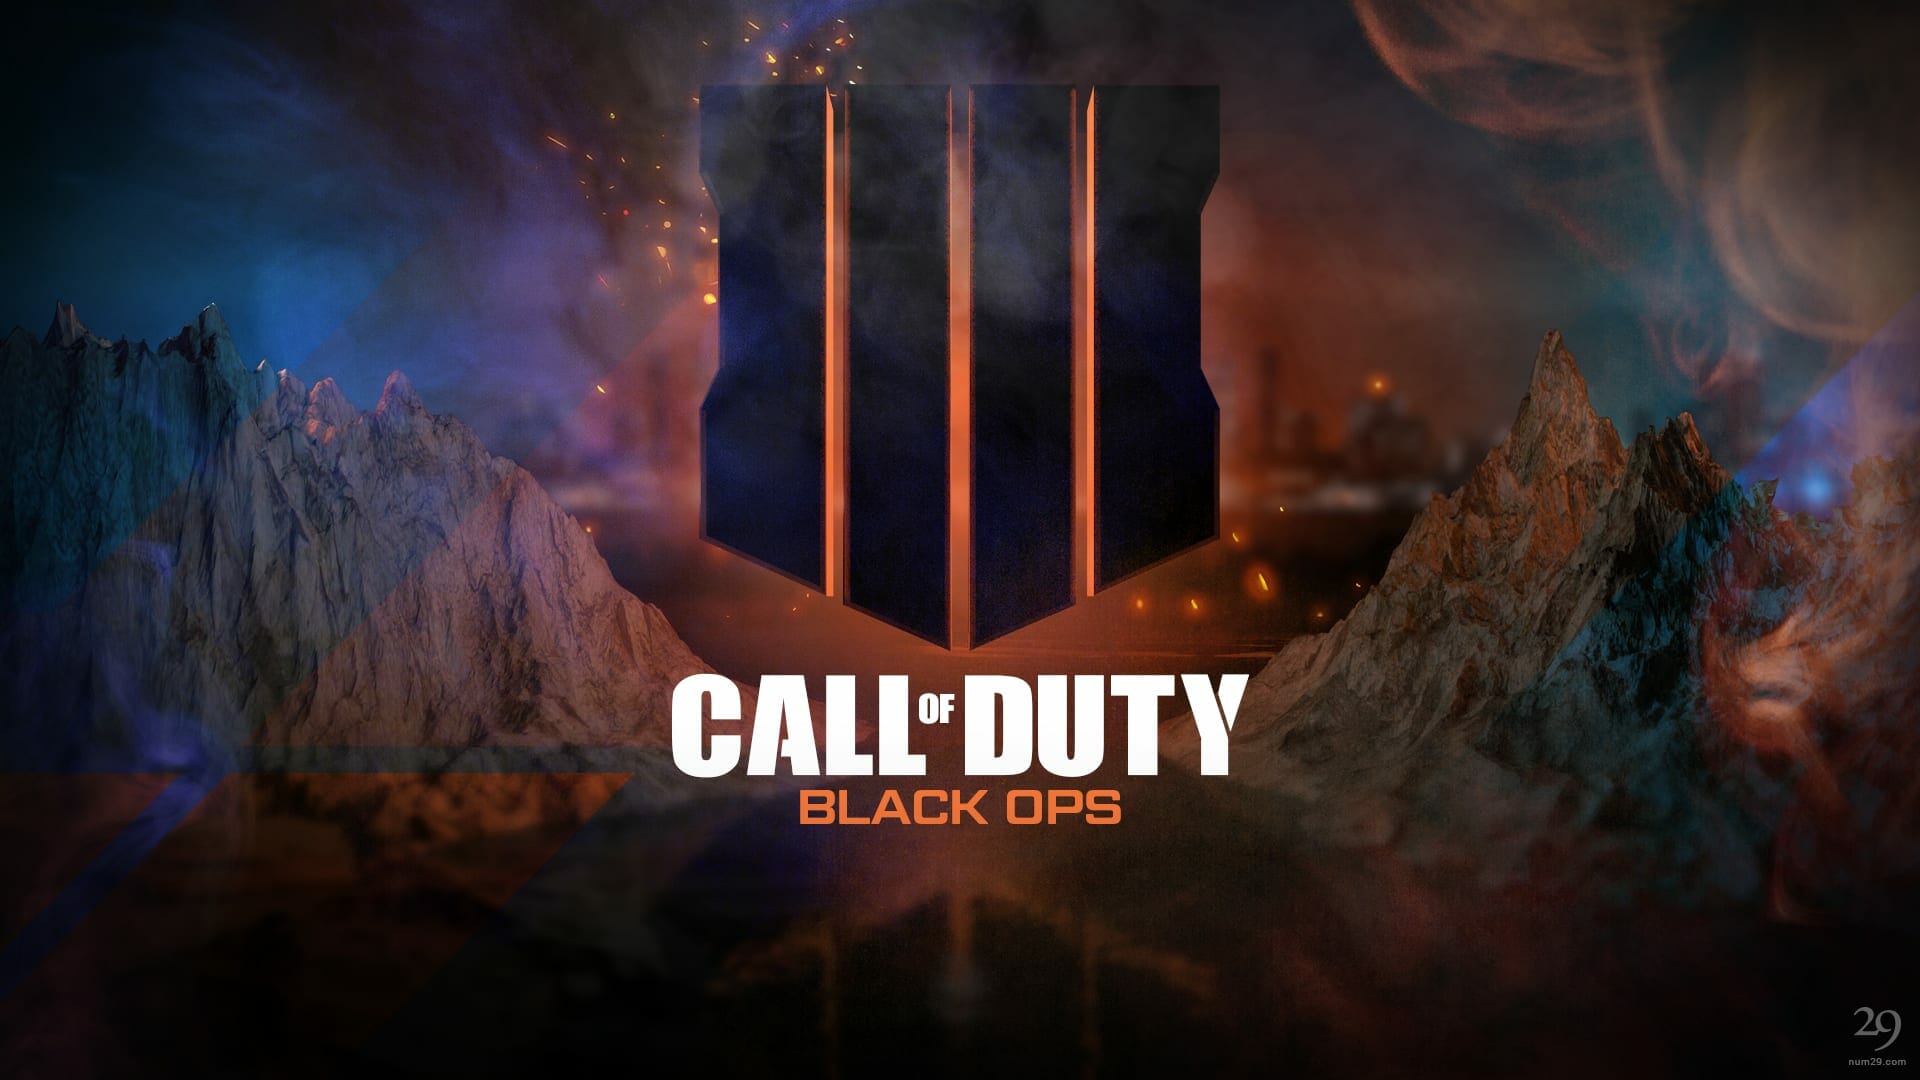 How To Fix Black Ops 4 High Cpu Usage And Low Performance Issue